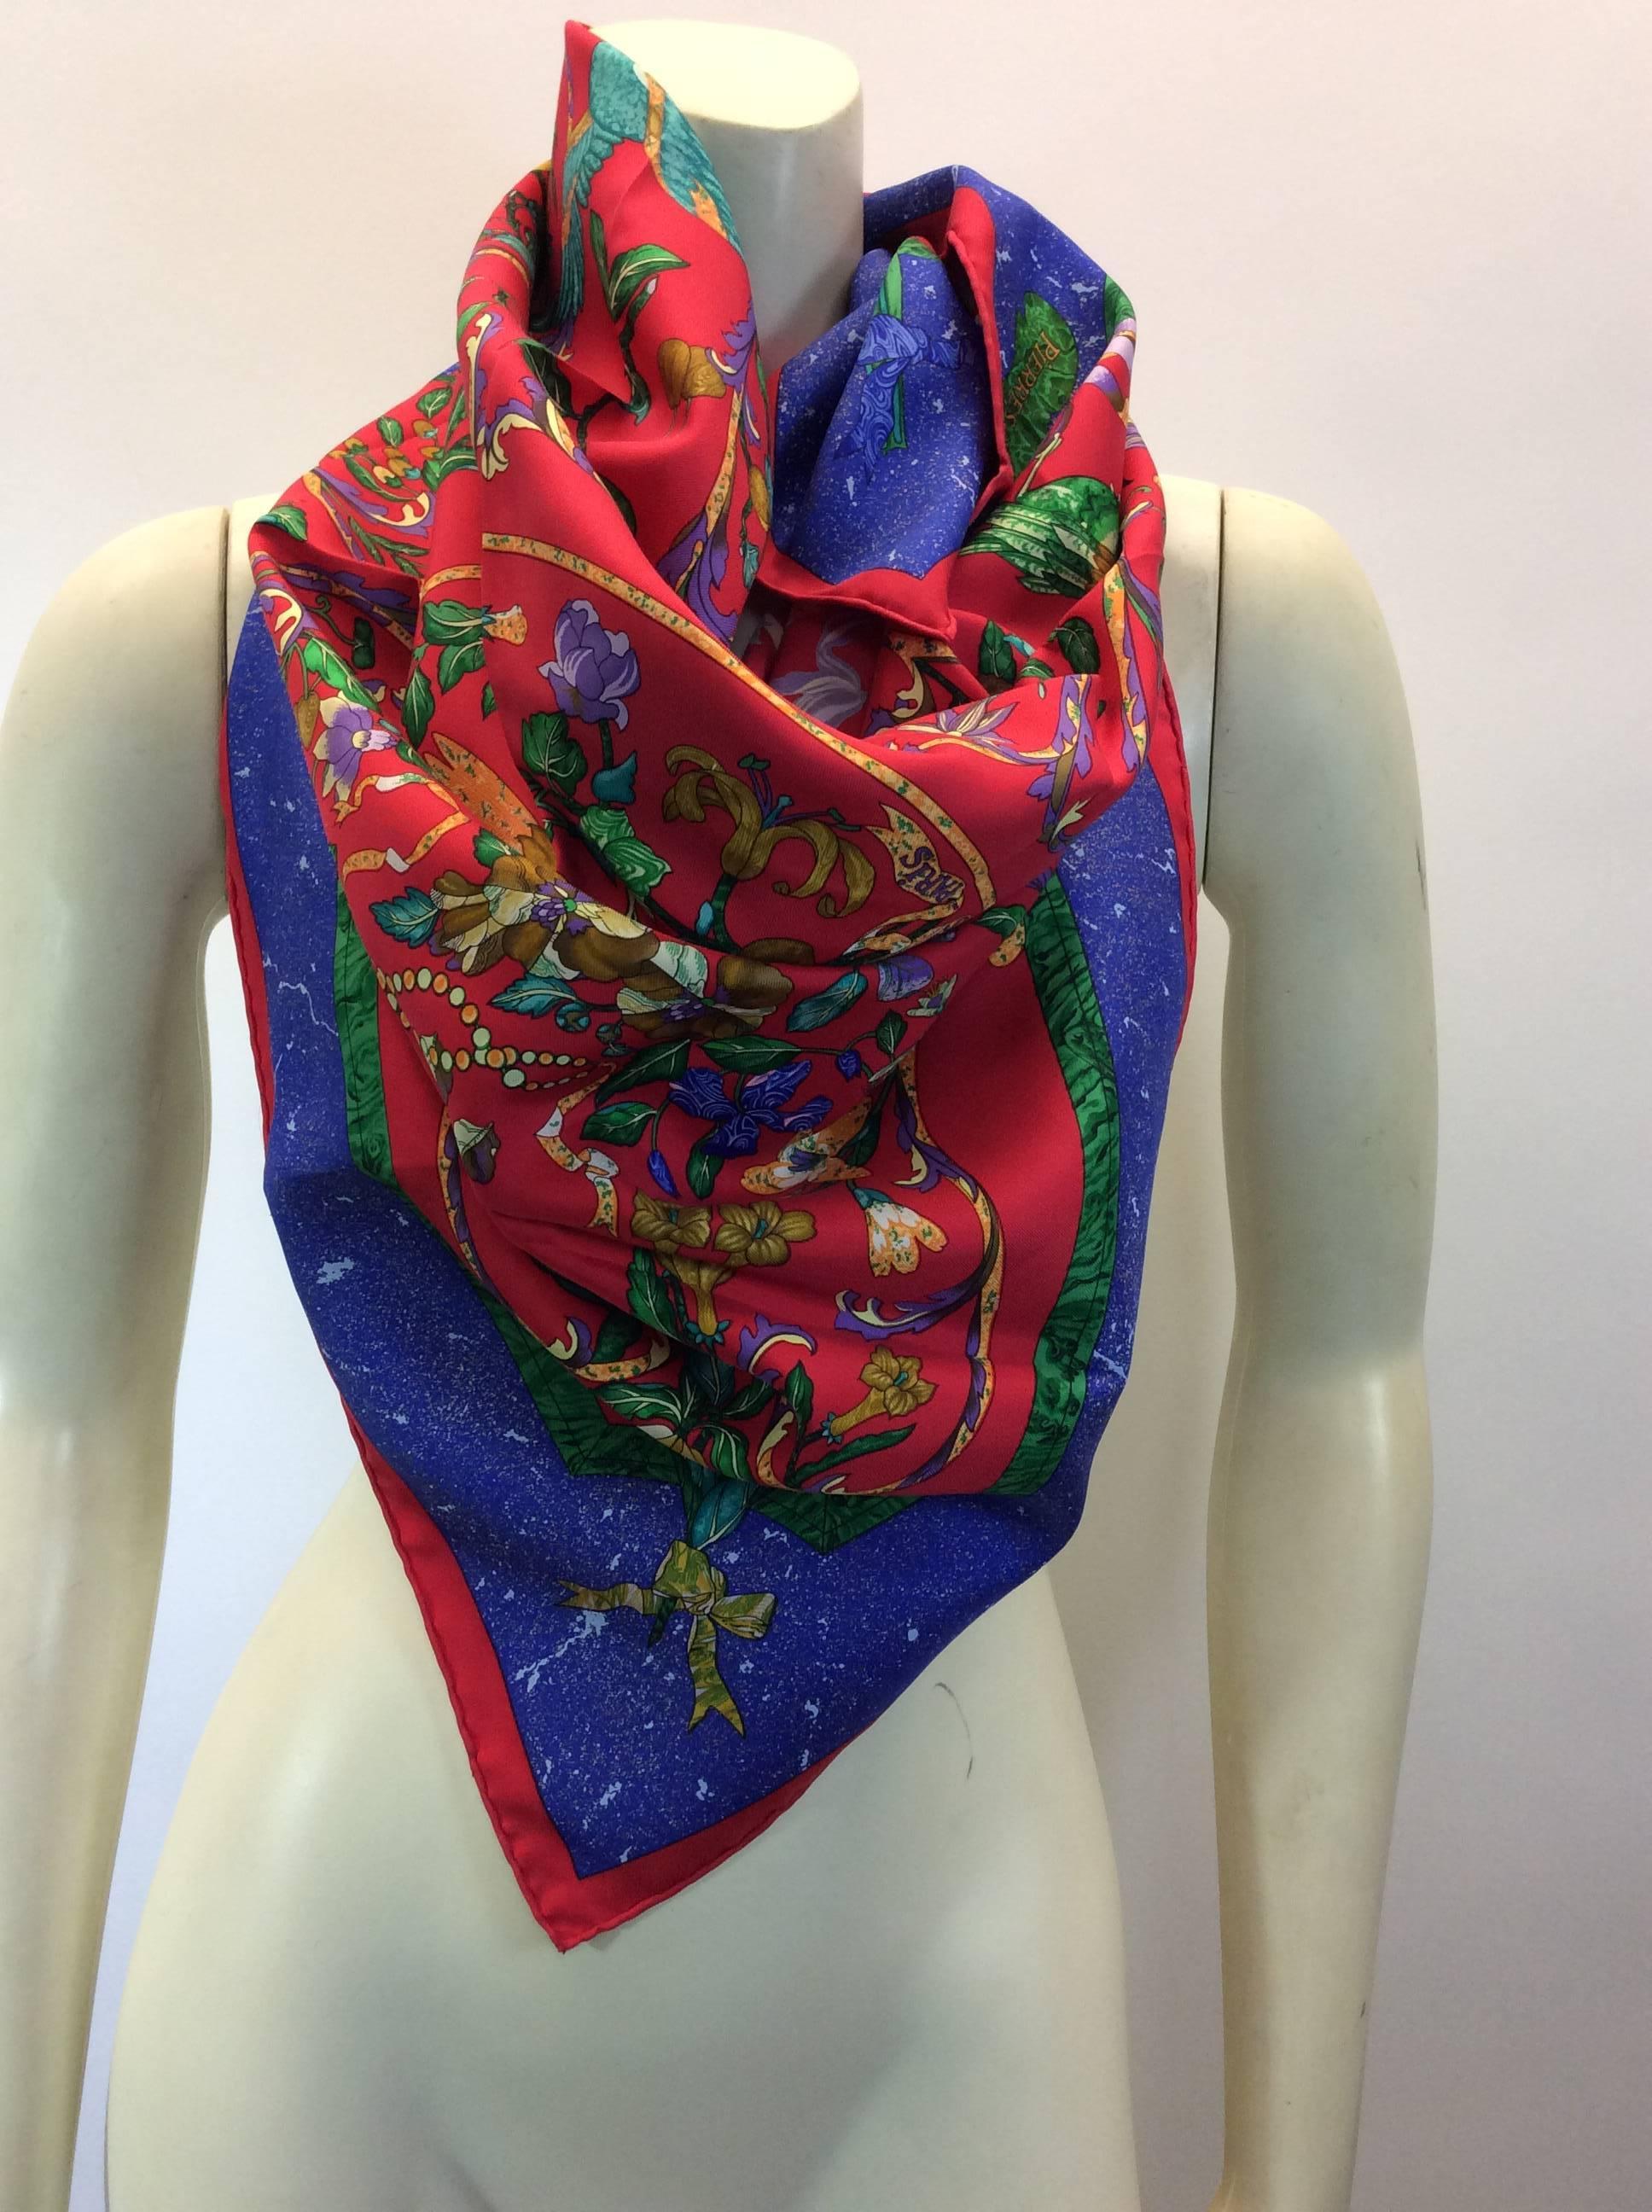 Hermes Red and Blue Print Scarf
35